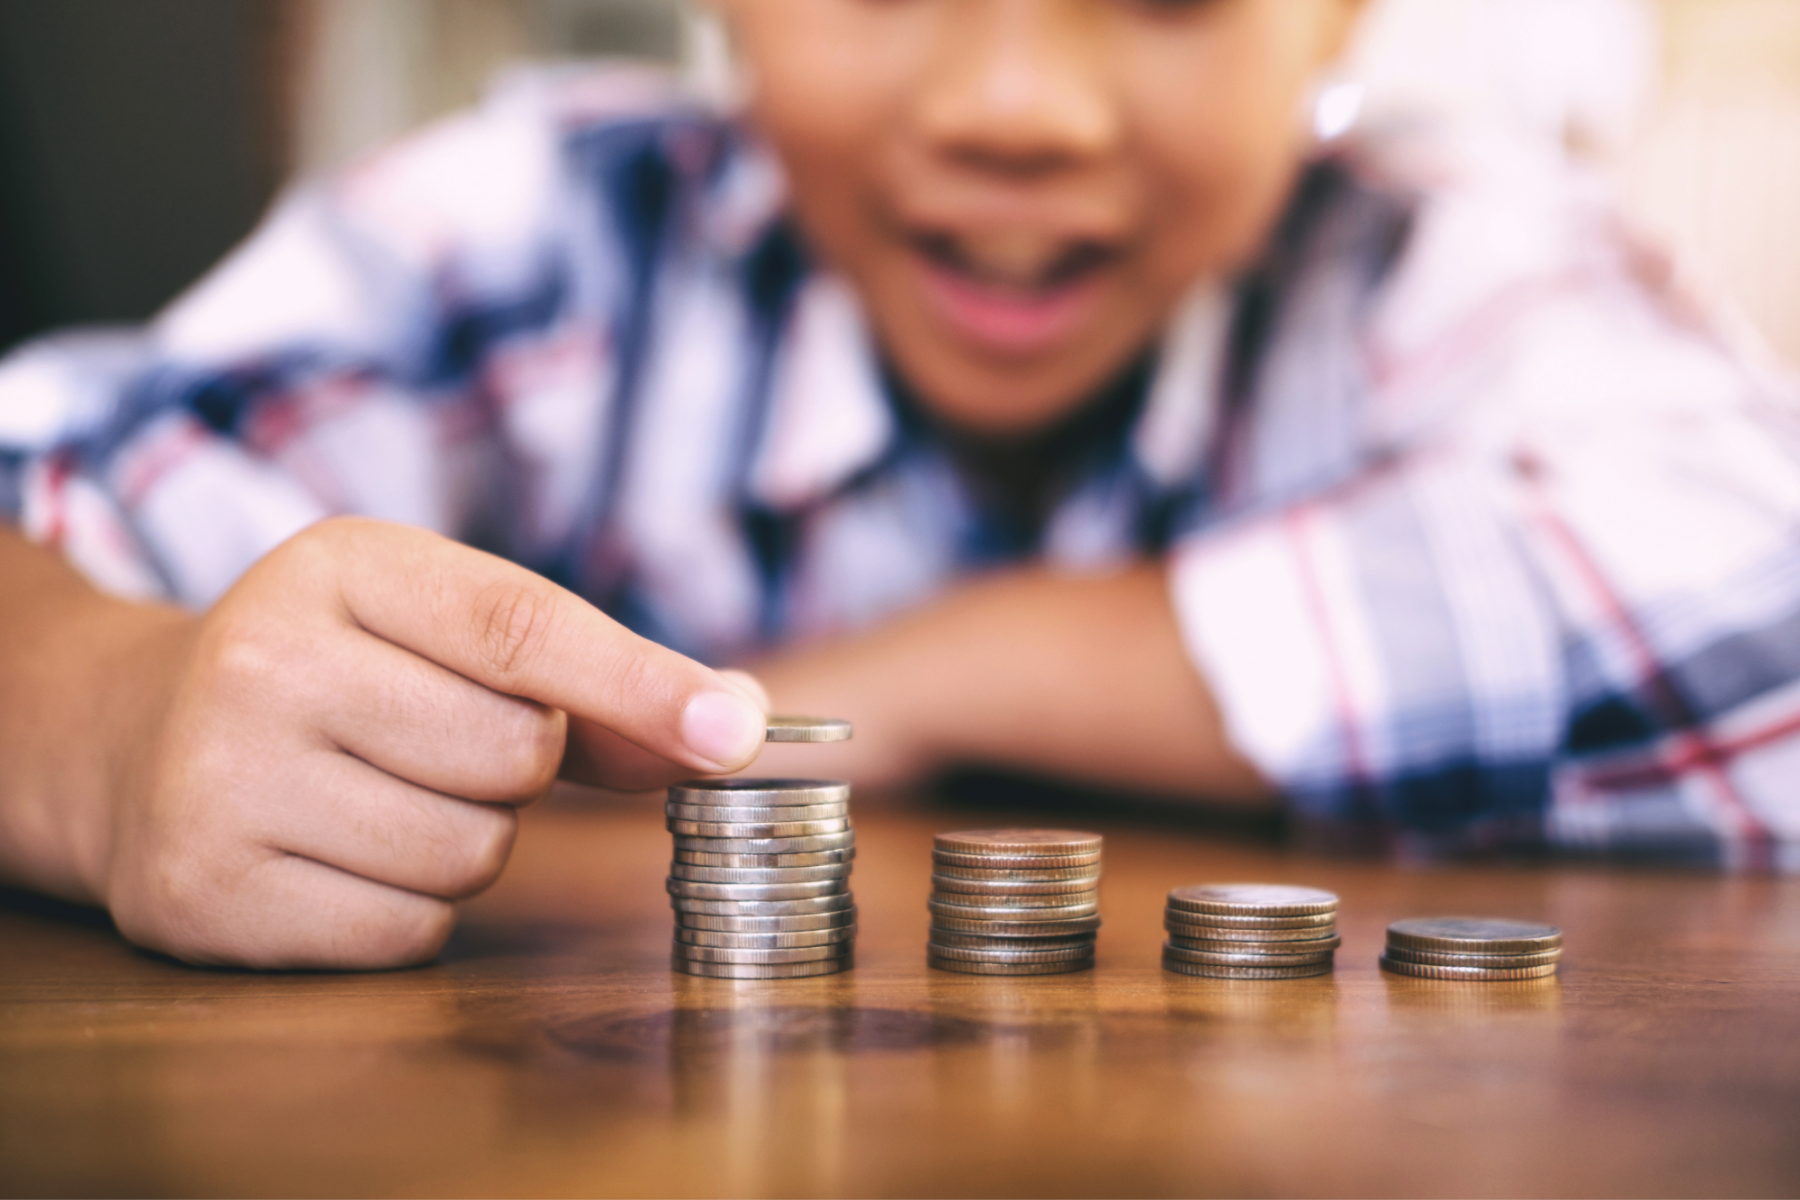 Young boy counting coins on table